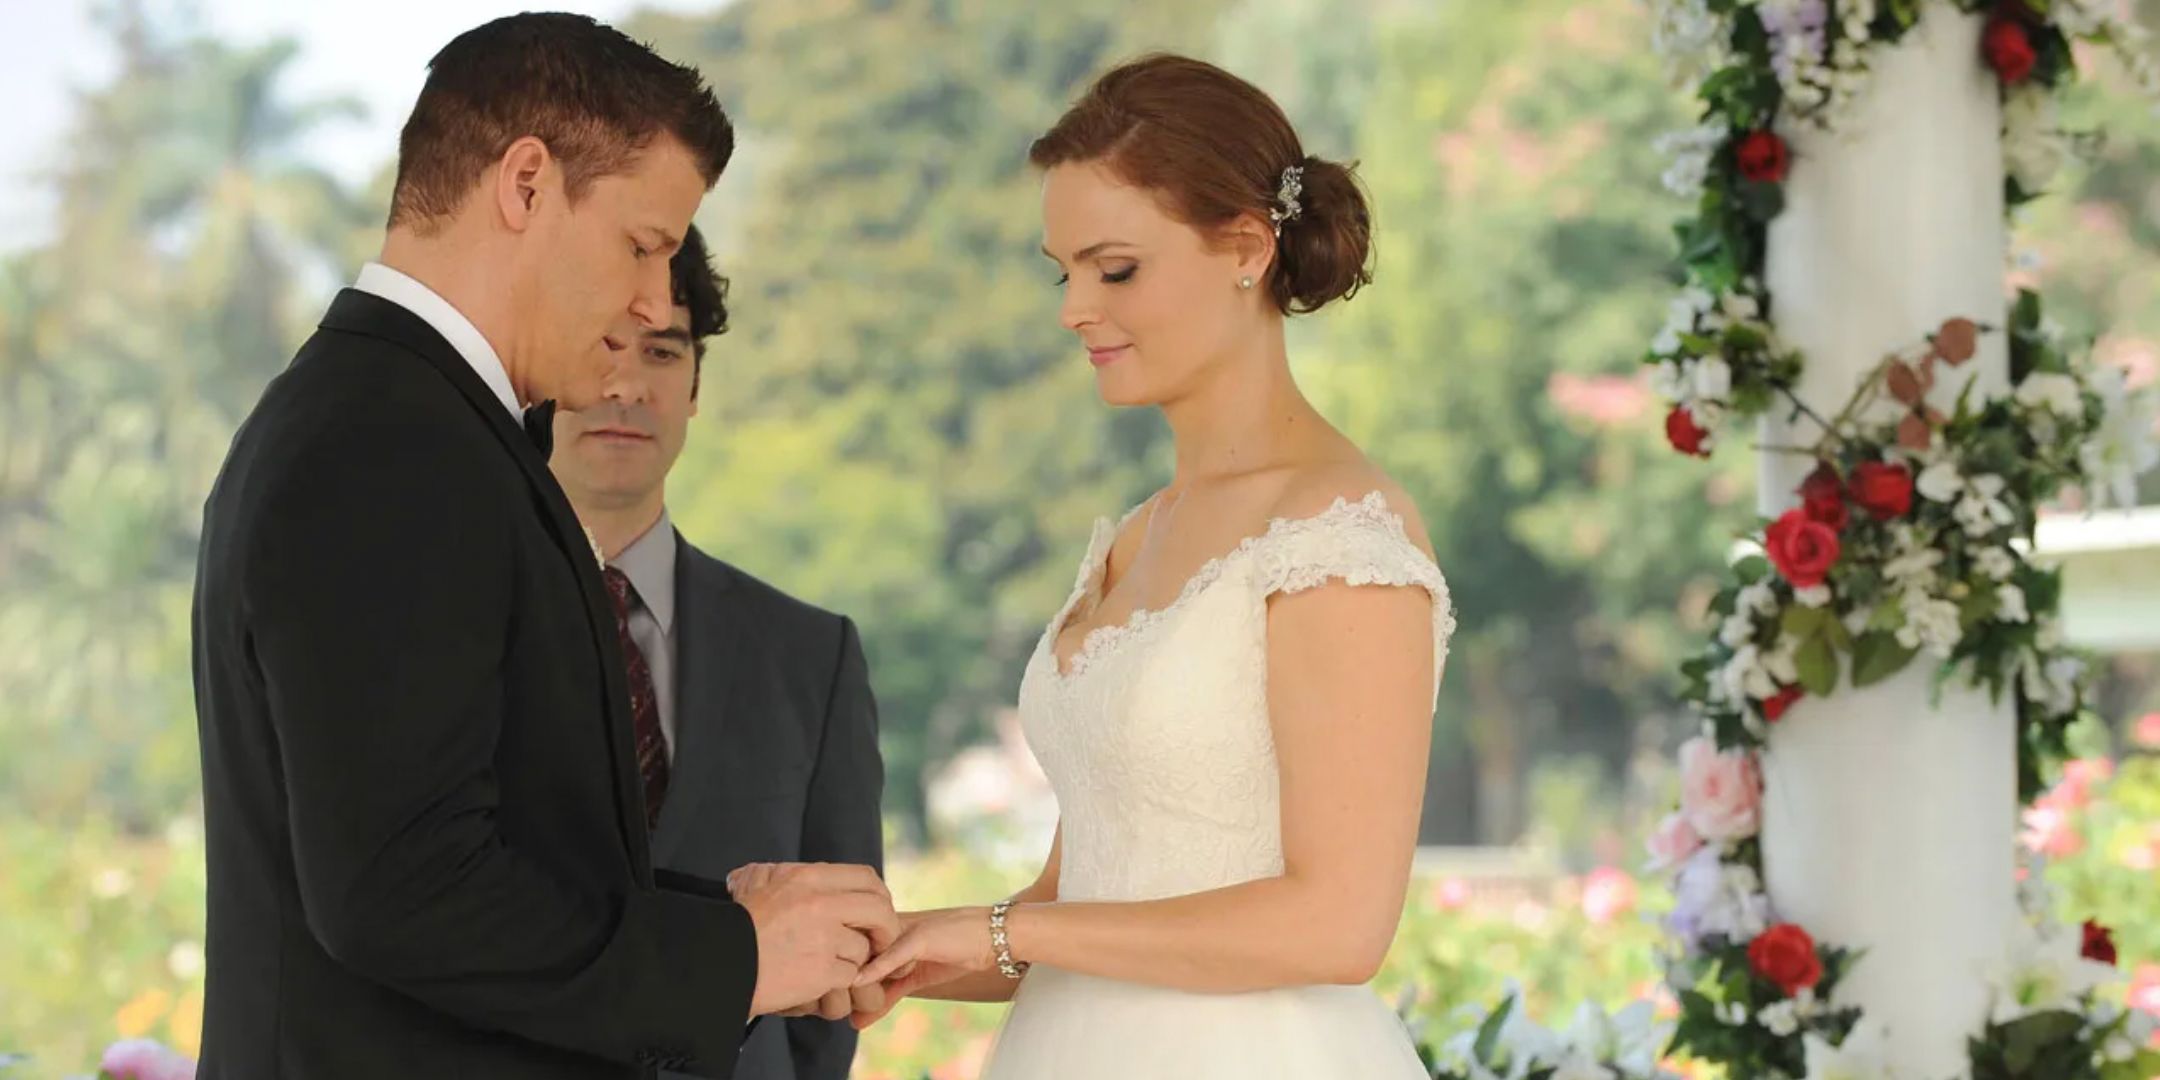 Booth putting a ring on Brennan on their wedding day in Bones